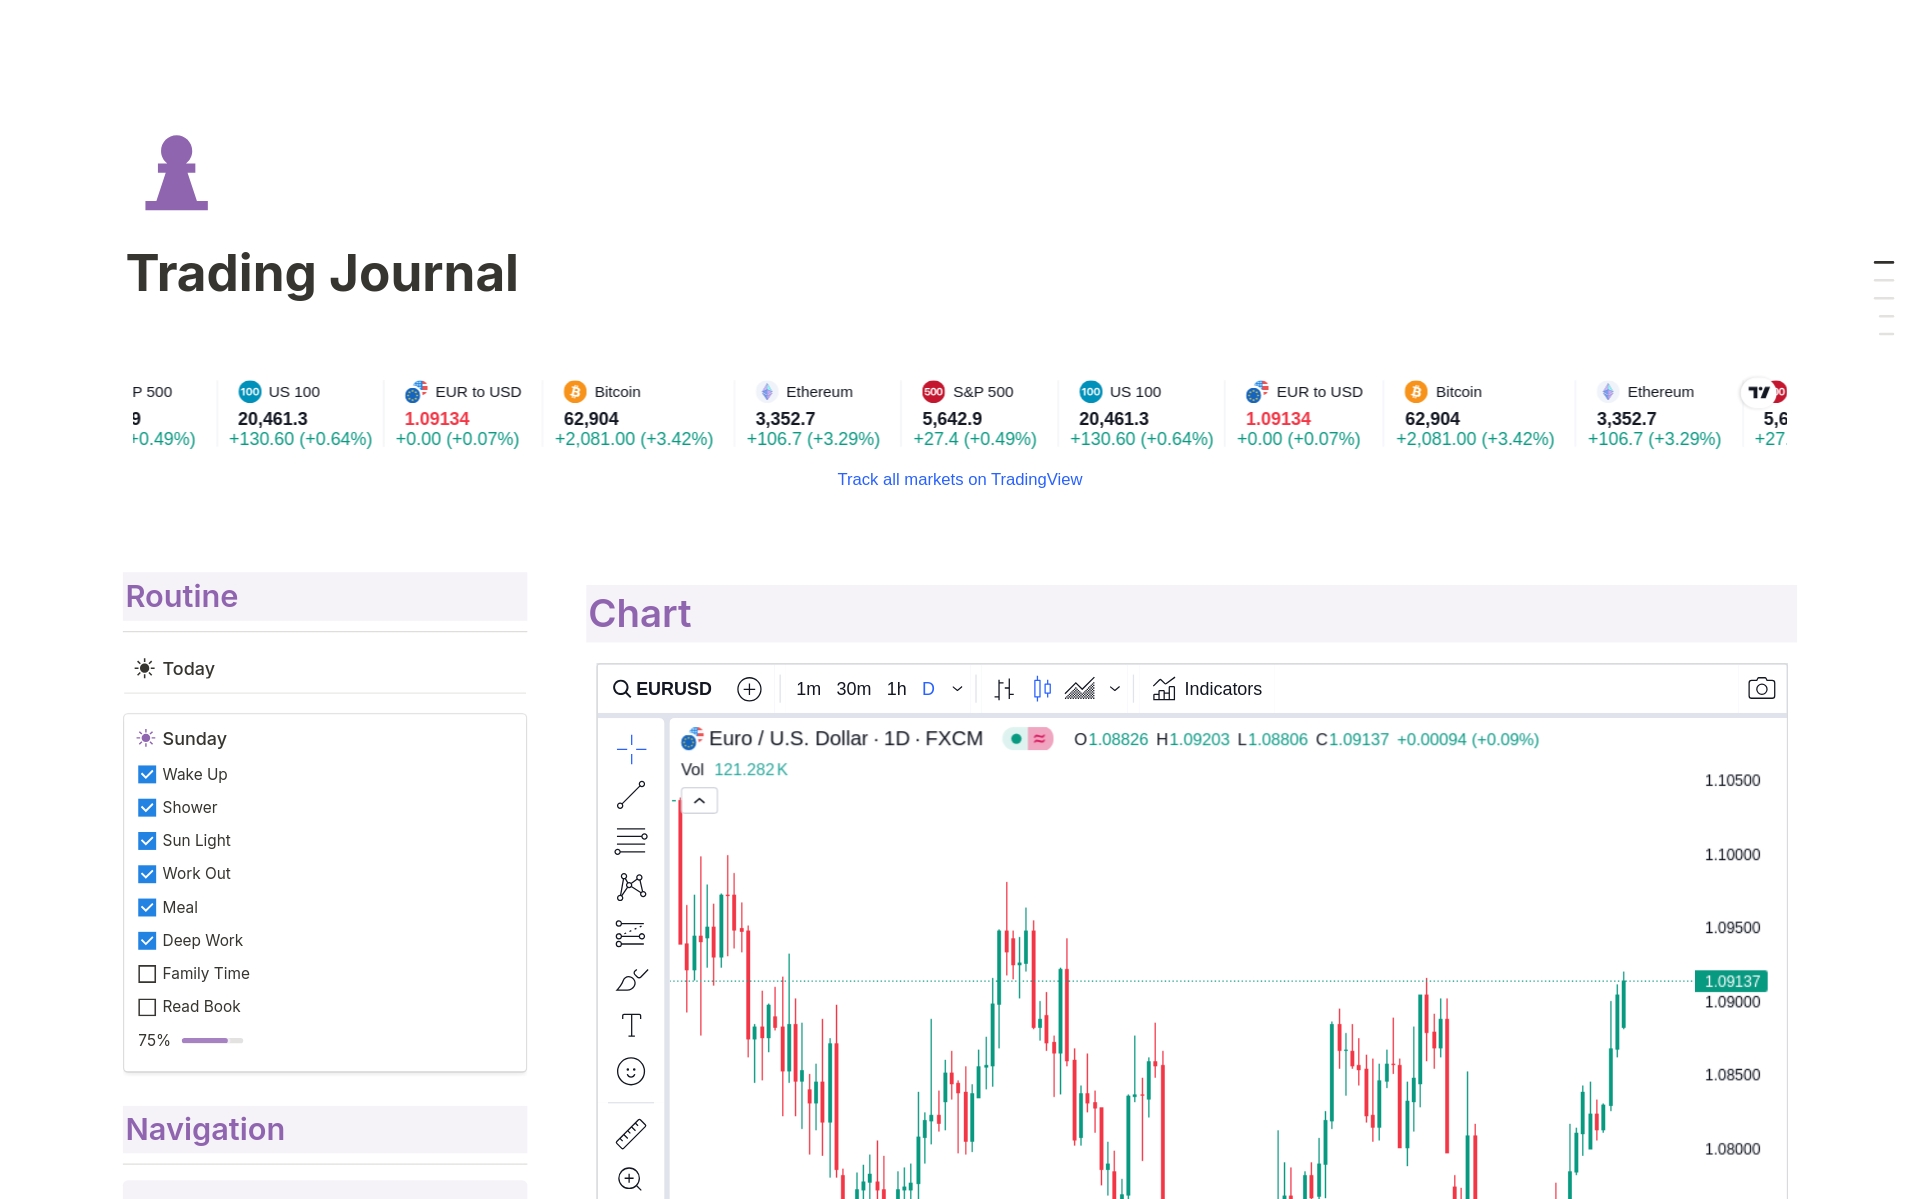 Download This free Trading Journal to streamline your trading process, track every trade, and improve your strategies. Keep all your trades, notes, and strategies in one organized place for better decision-making and increased confidence.